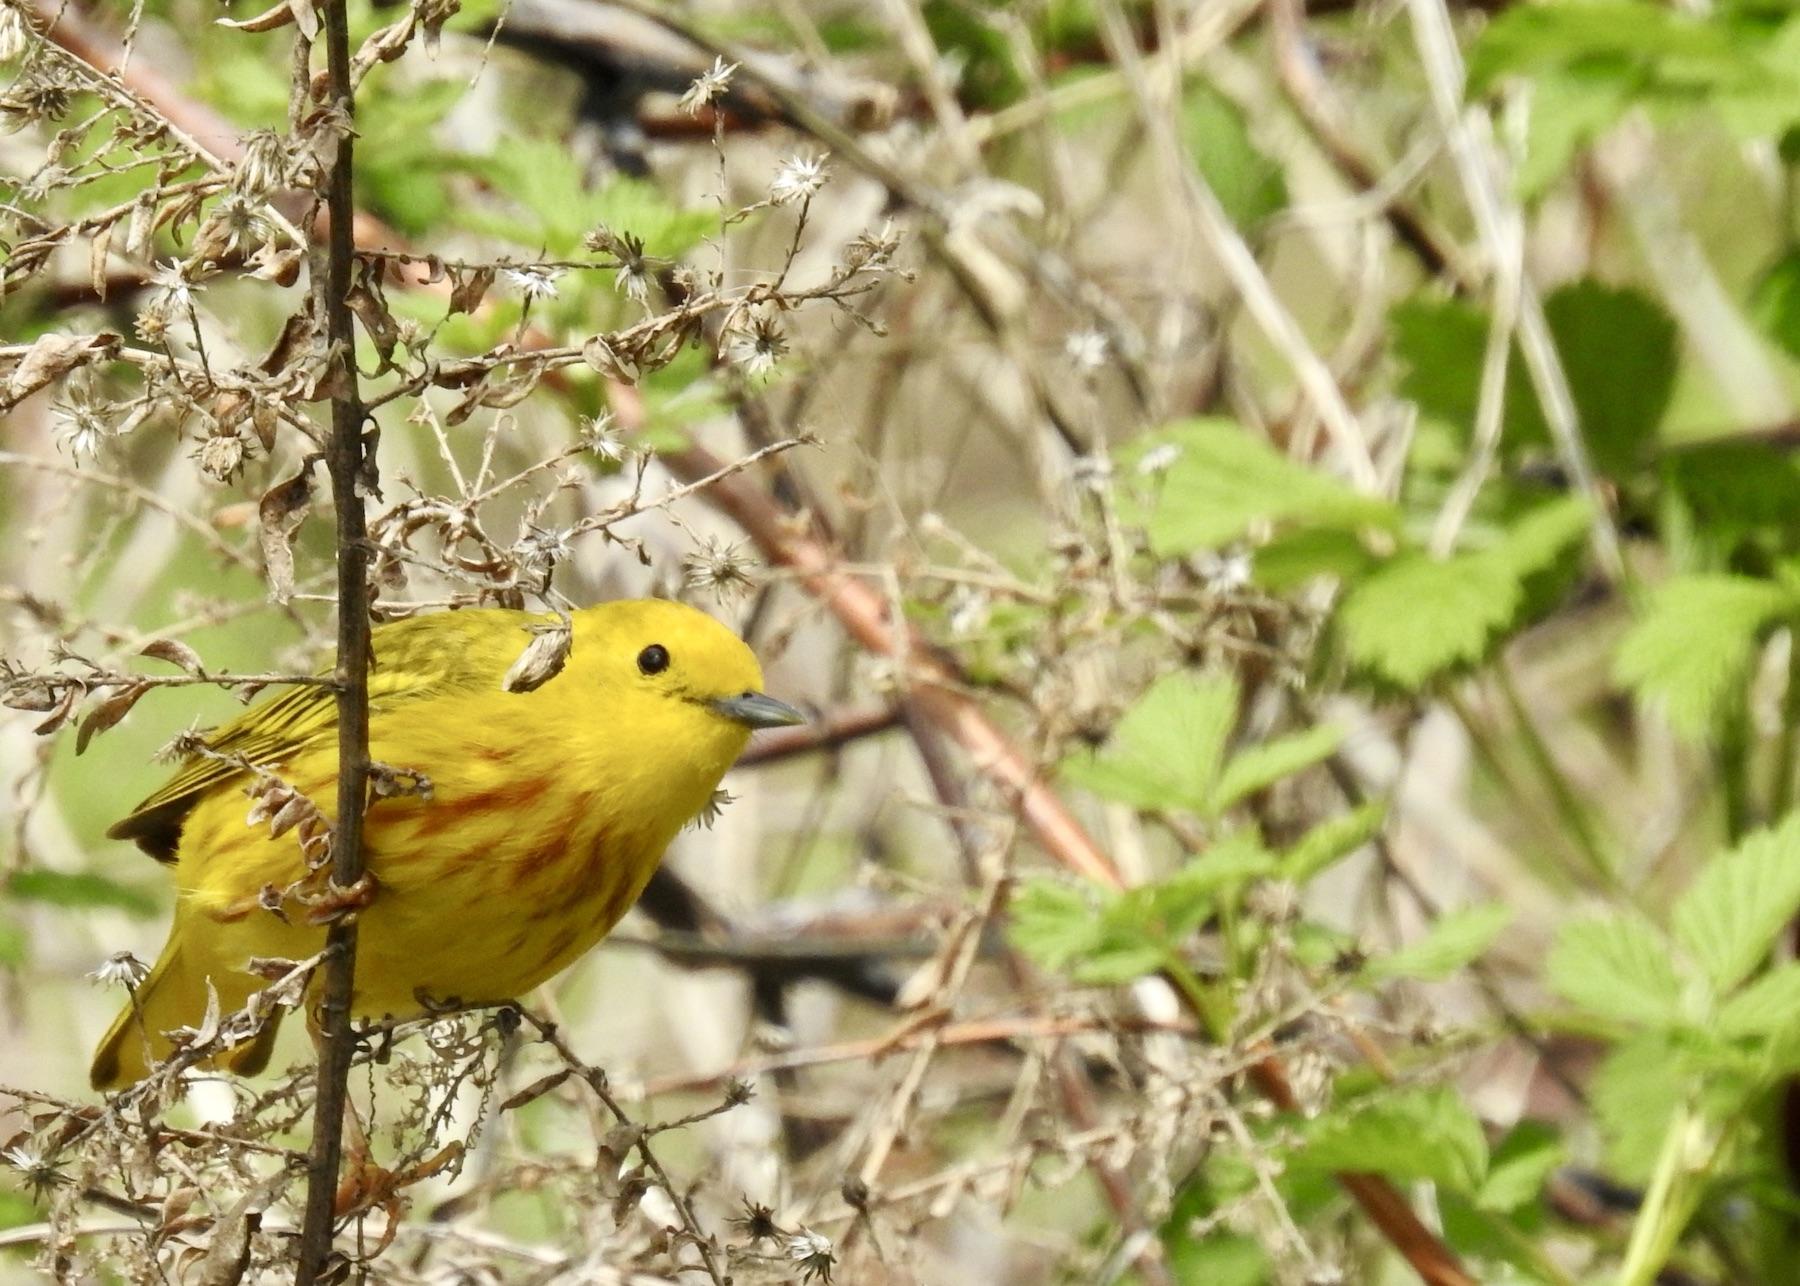 Point Pelee National Park is known for its array of warblers, including the Yellow Warbler.